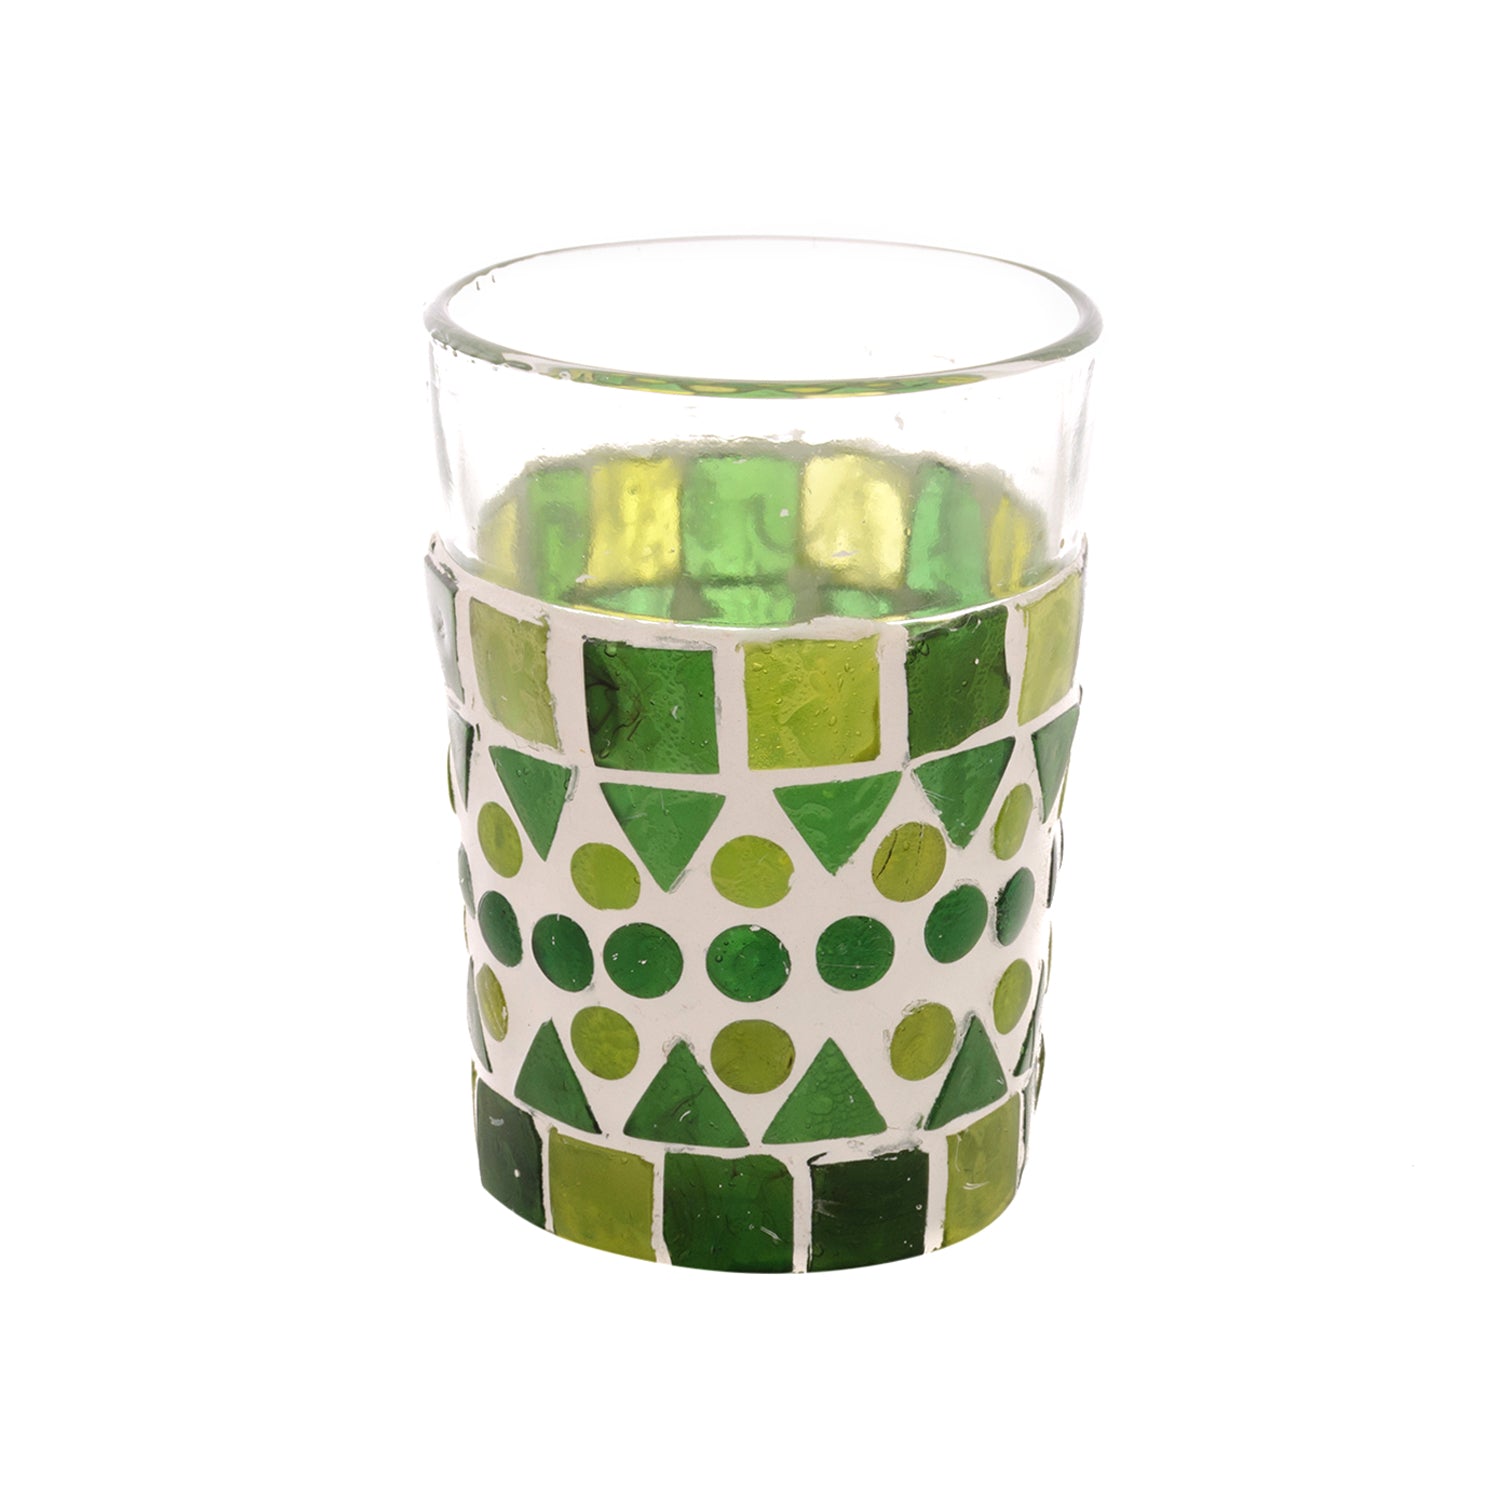 Hand Painted Tea Glass Set of 4: Green